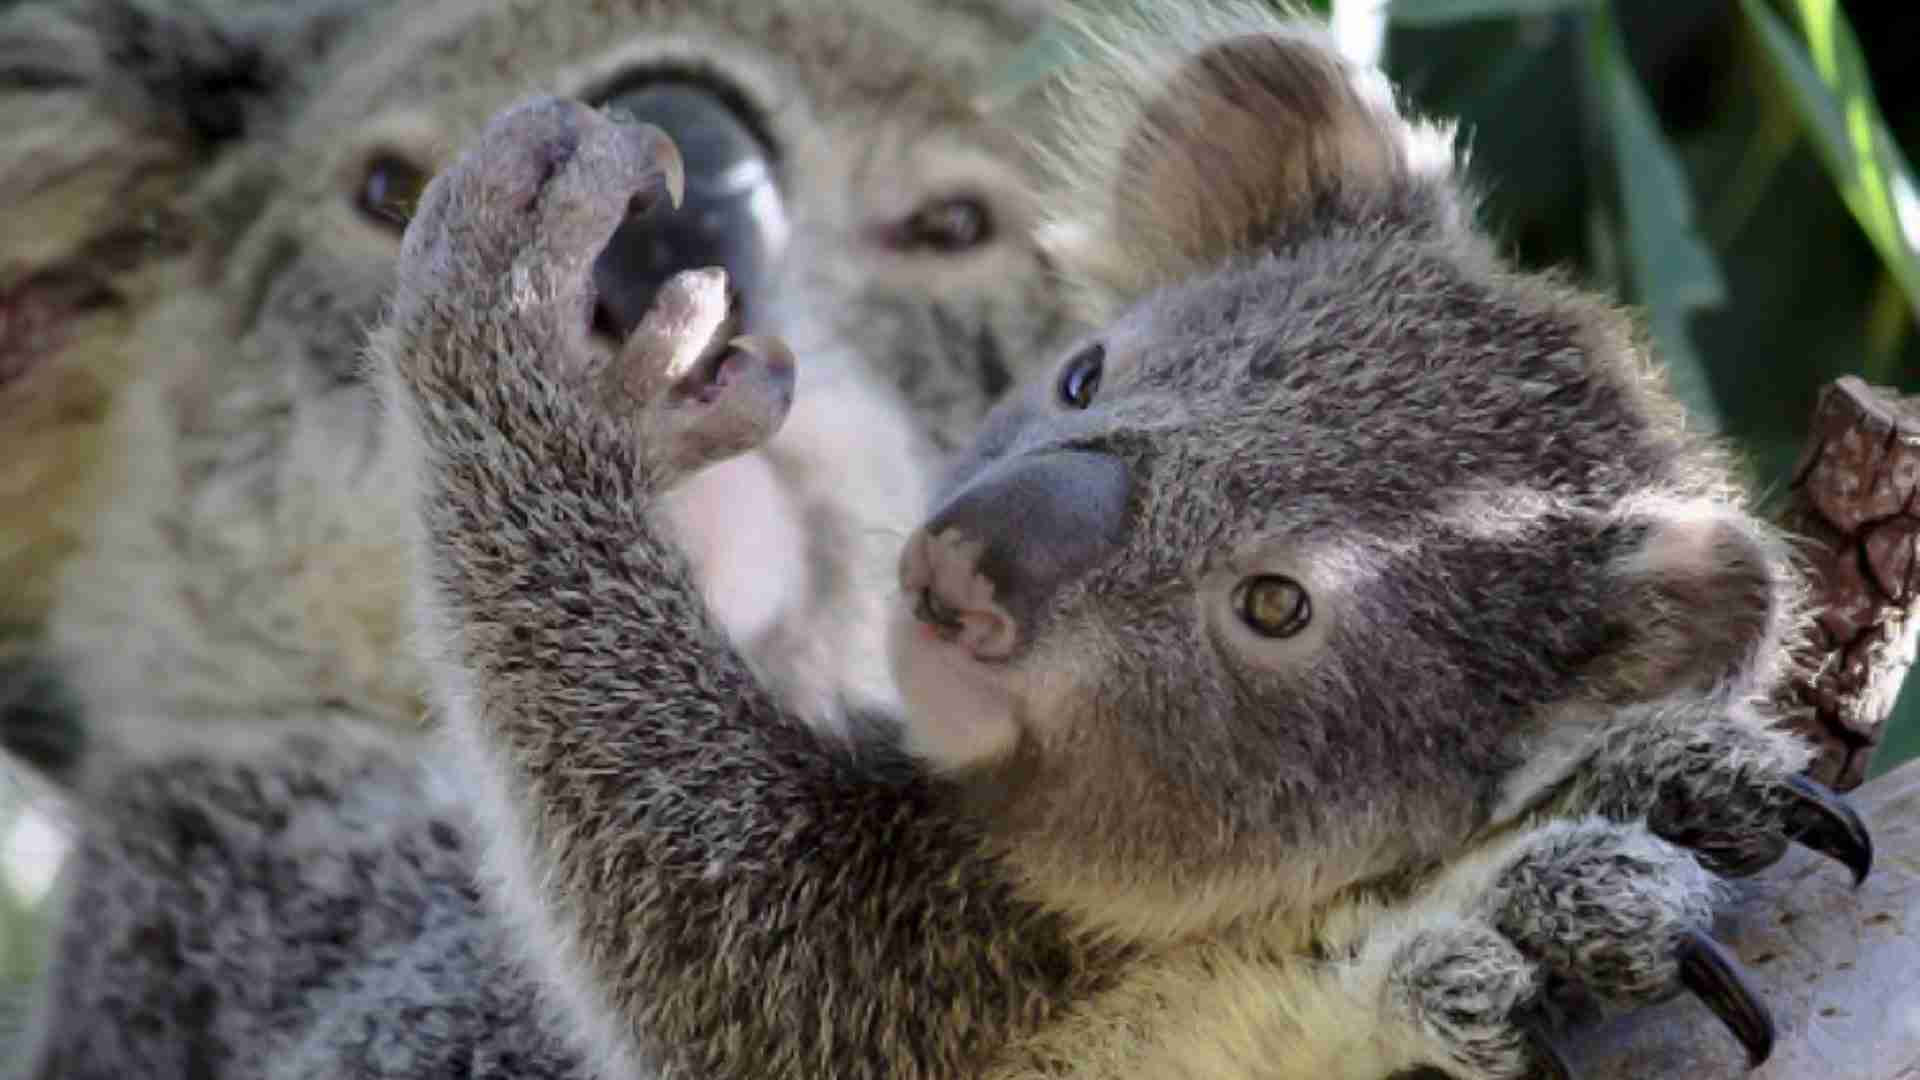 Mother and baby koala in a tree the baby koala is holding his mother's nose with one paw